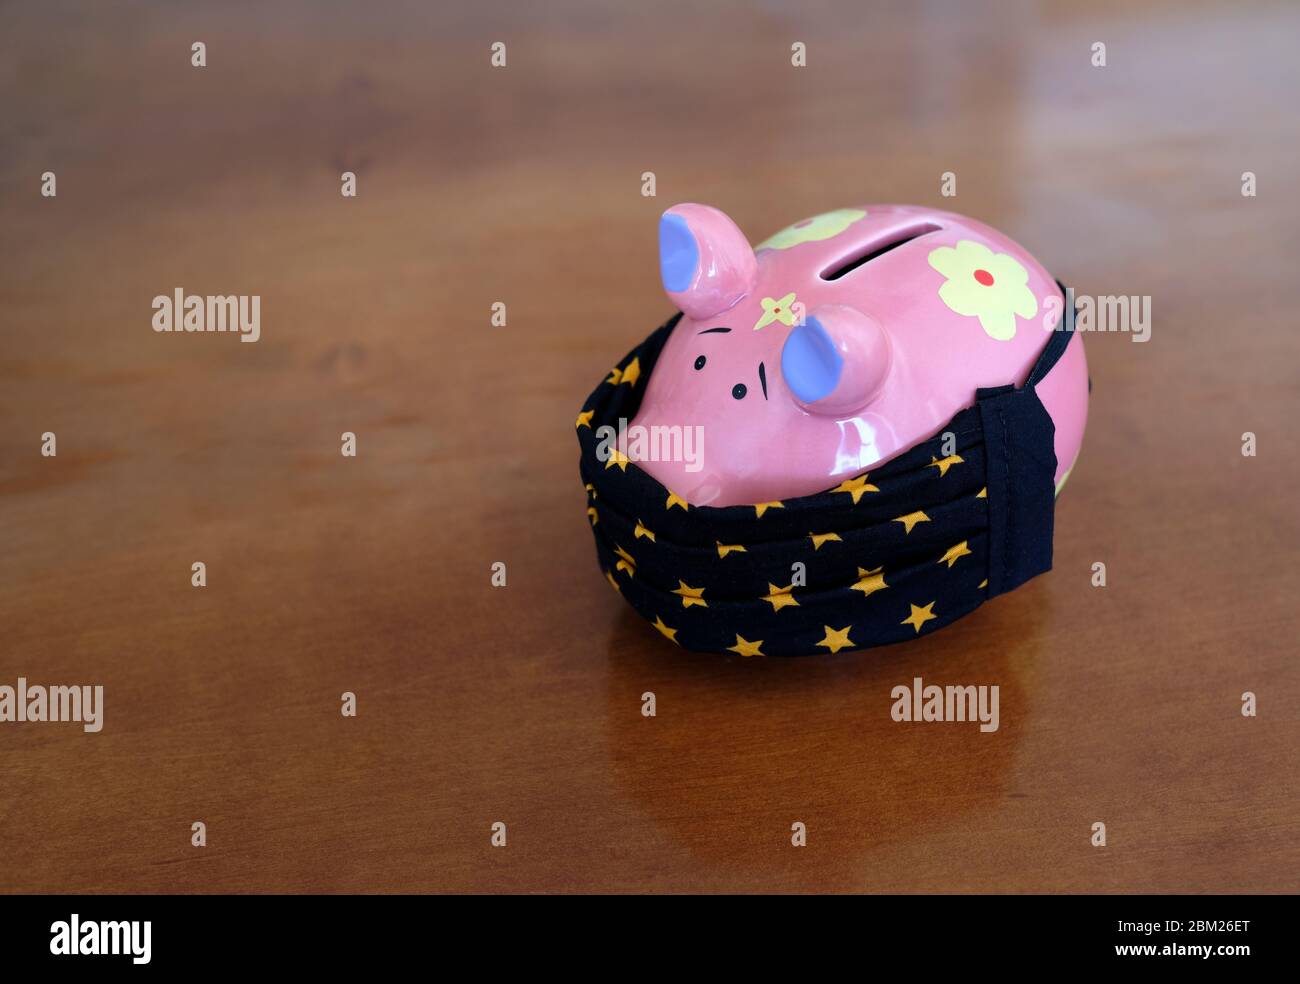 Lockdown and the financial impact: piggy bank wearing a face mask Stock Photo